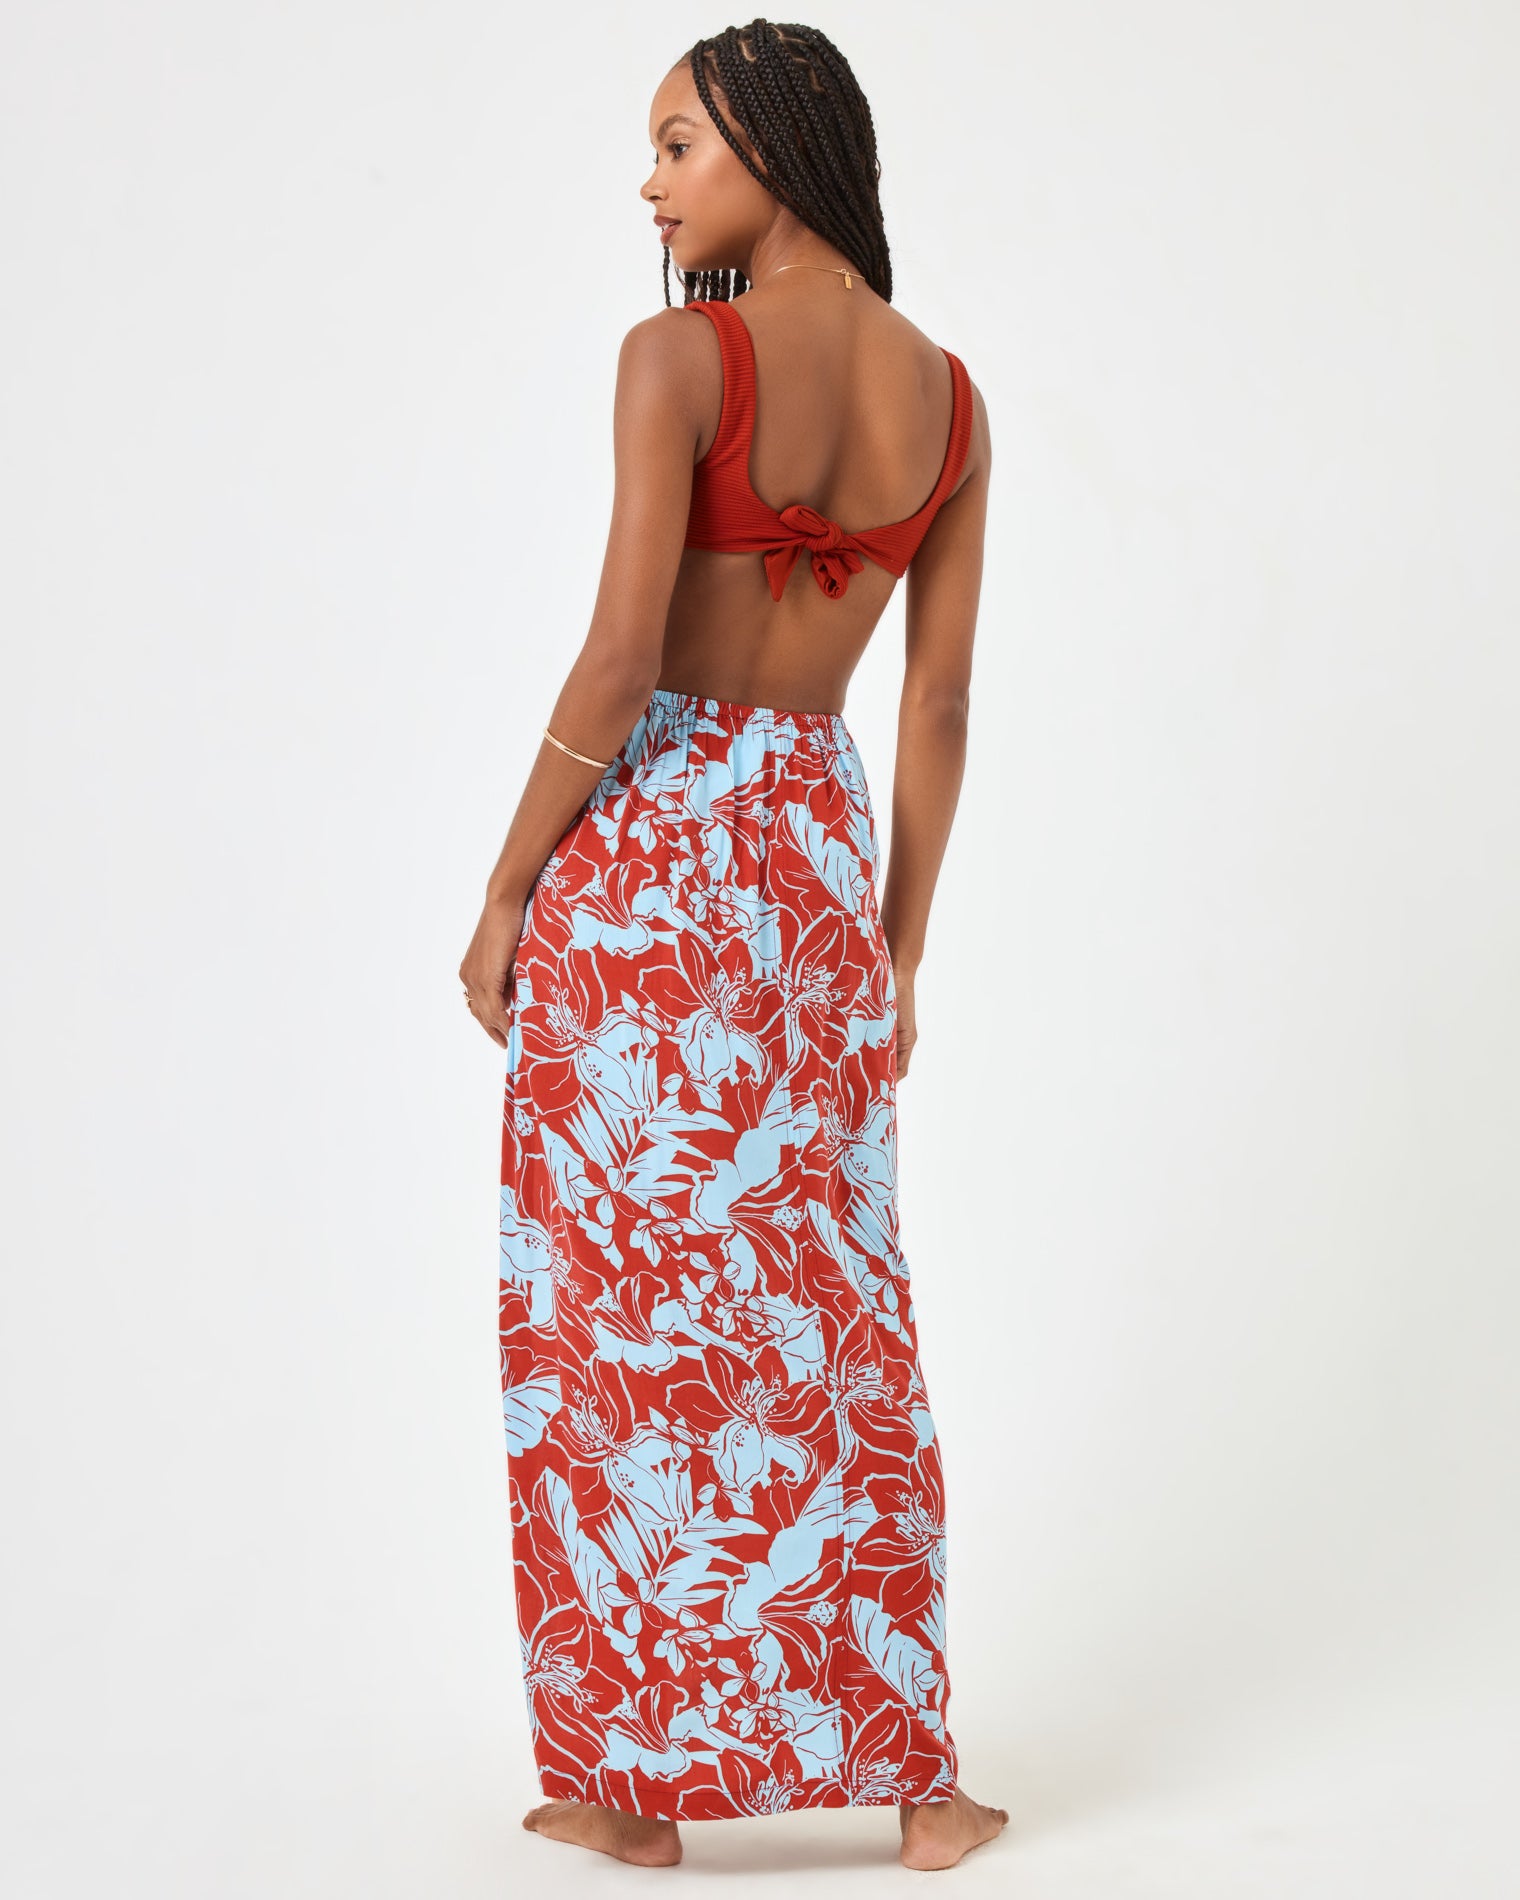 Printed Mia Cover-Up - Going Tropical Going Tropical | Model: Taelor (size: S)